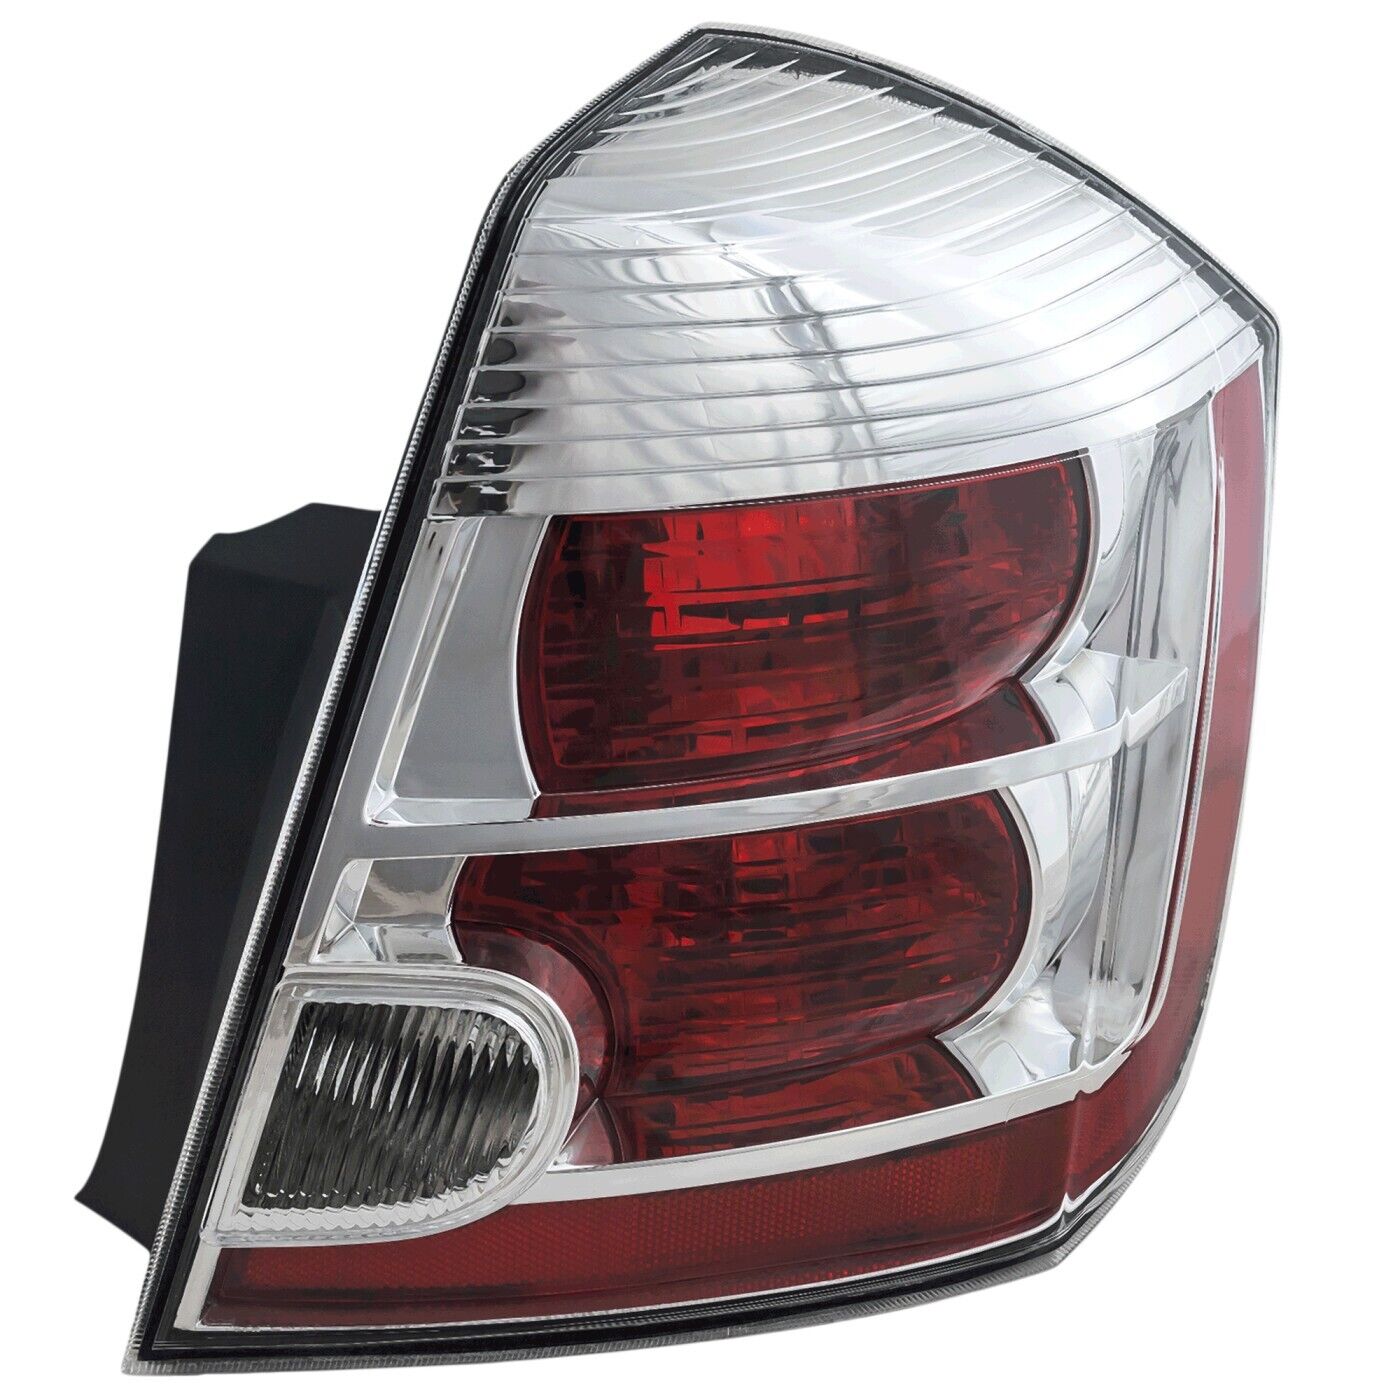 Halogen Tail Light For 2007-2009 Nissan Sentra 2.0L Eng. Right Clear & Red Lens